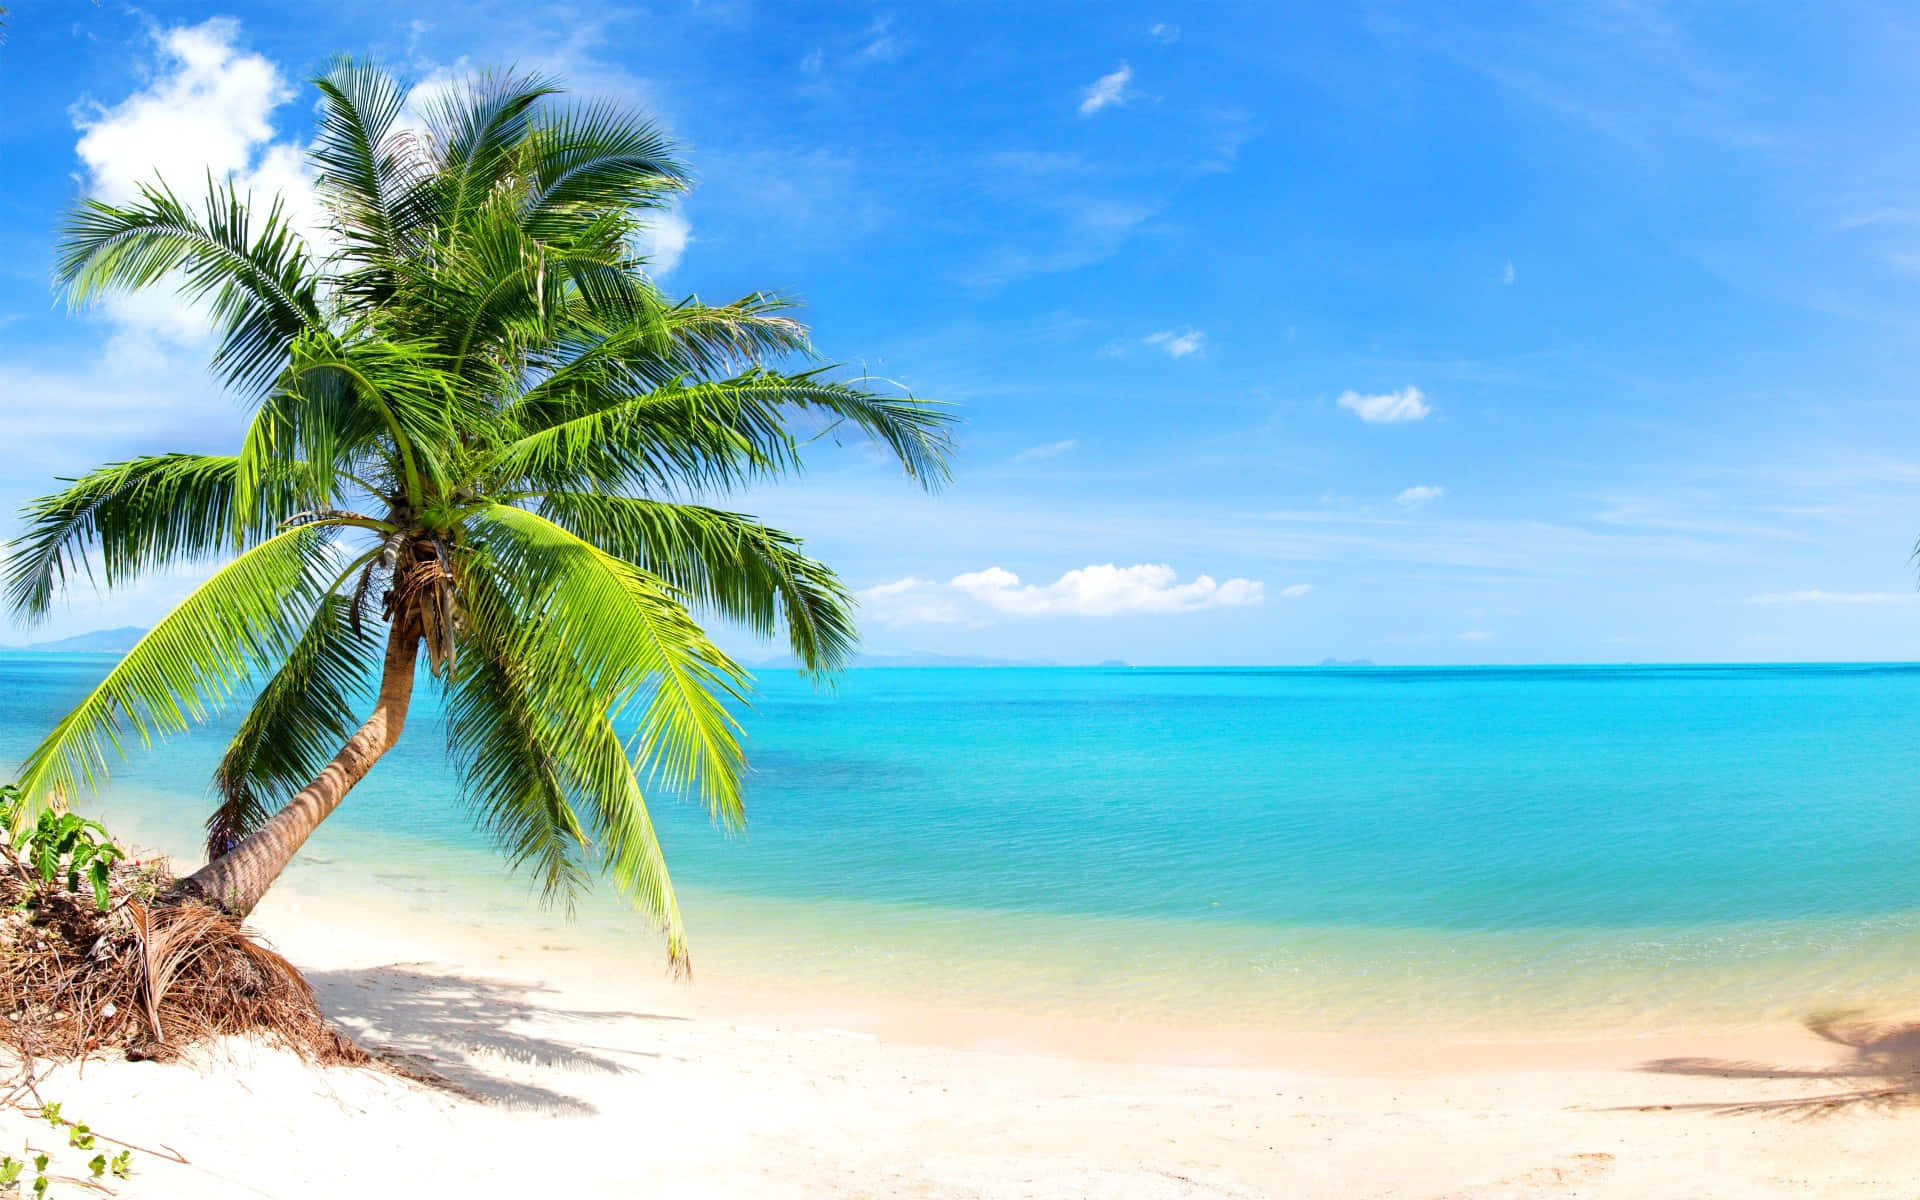 A Tropical Beach With Palm Trees And Blue Water